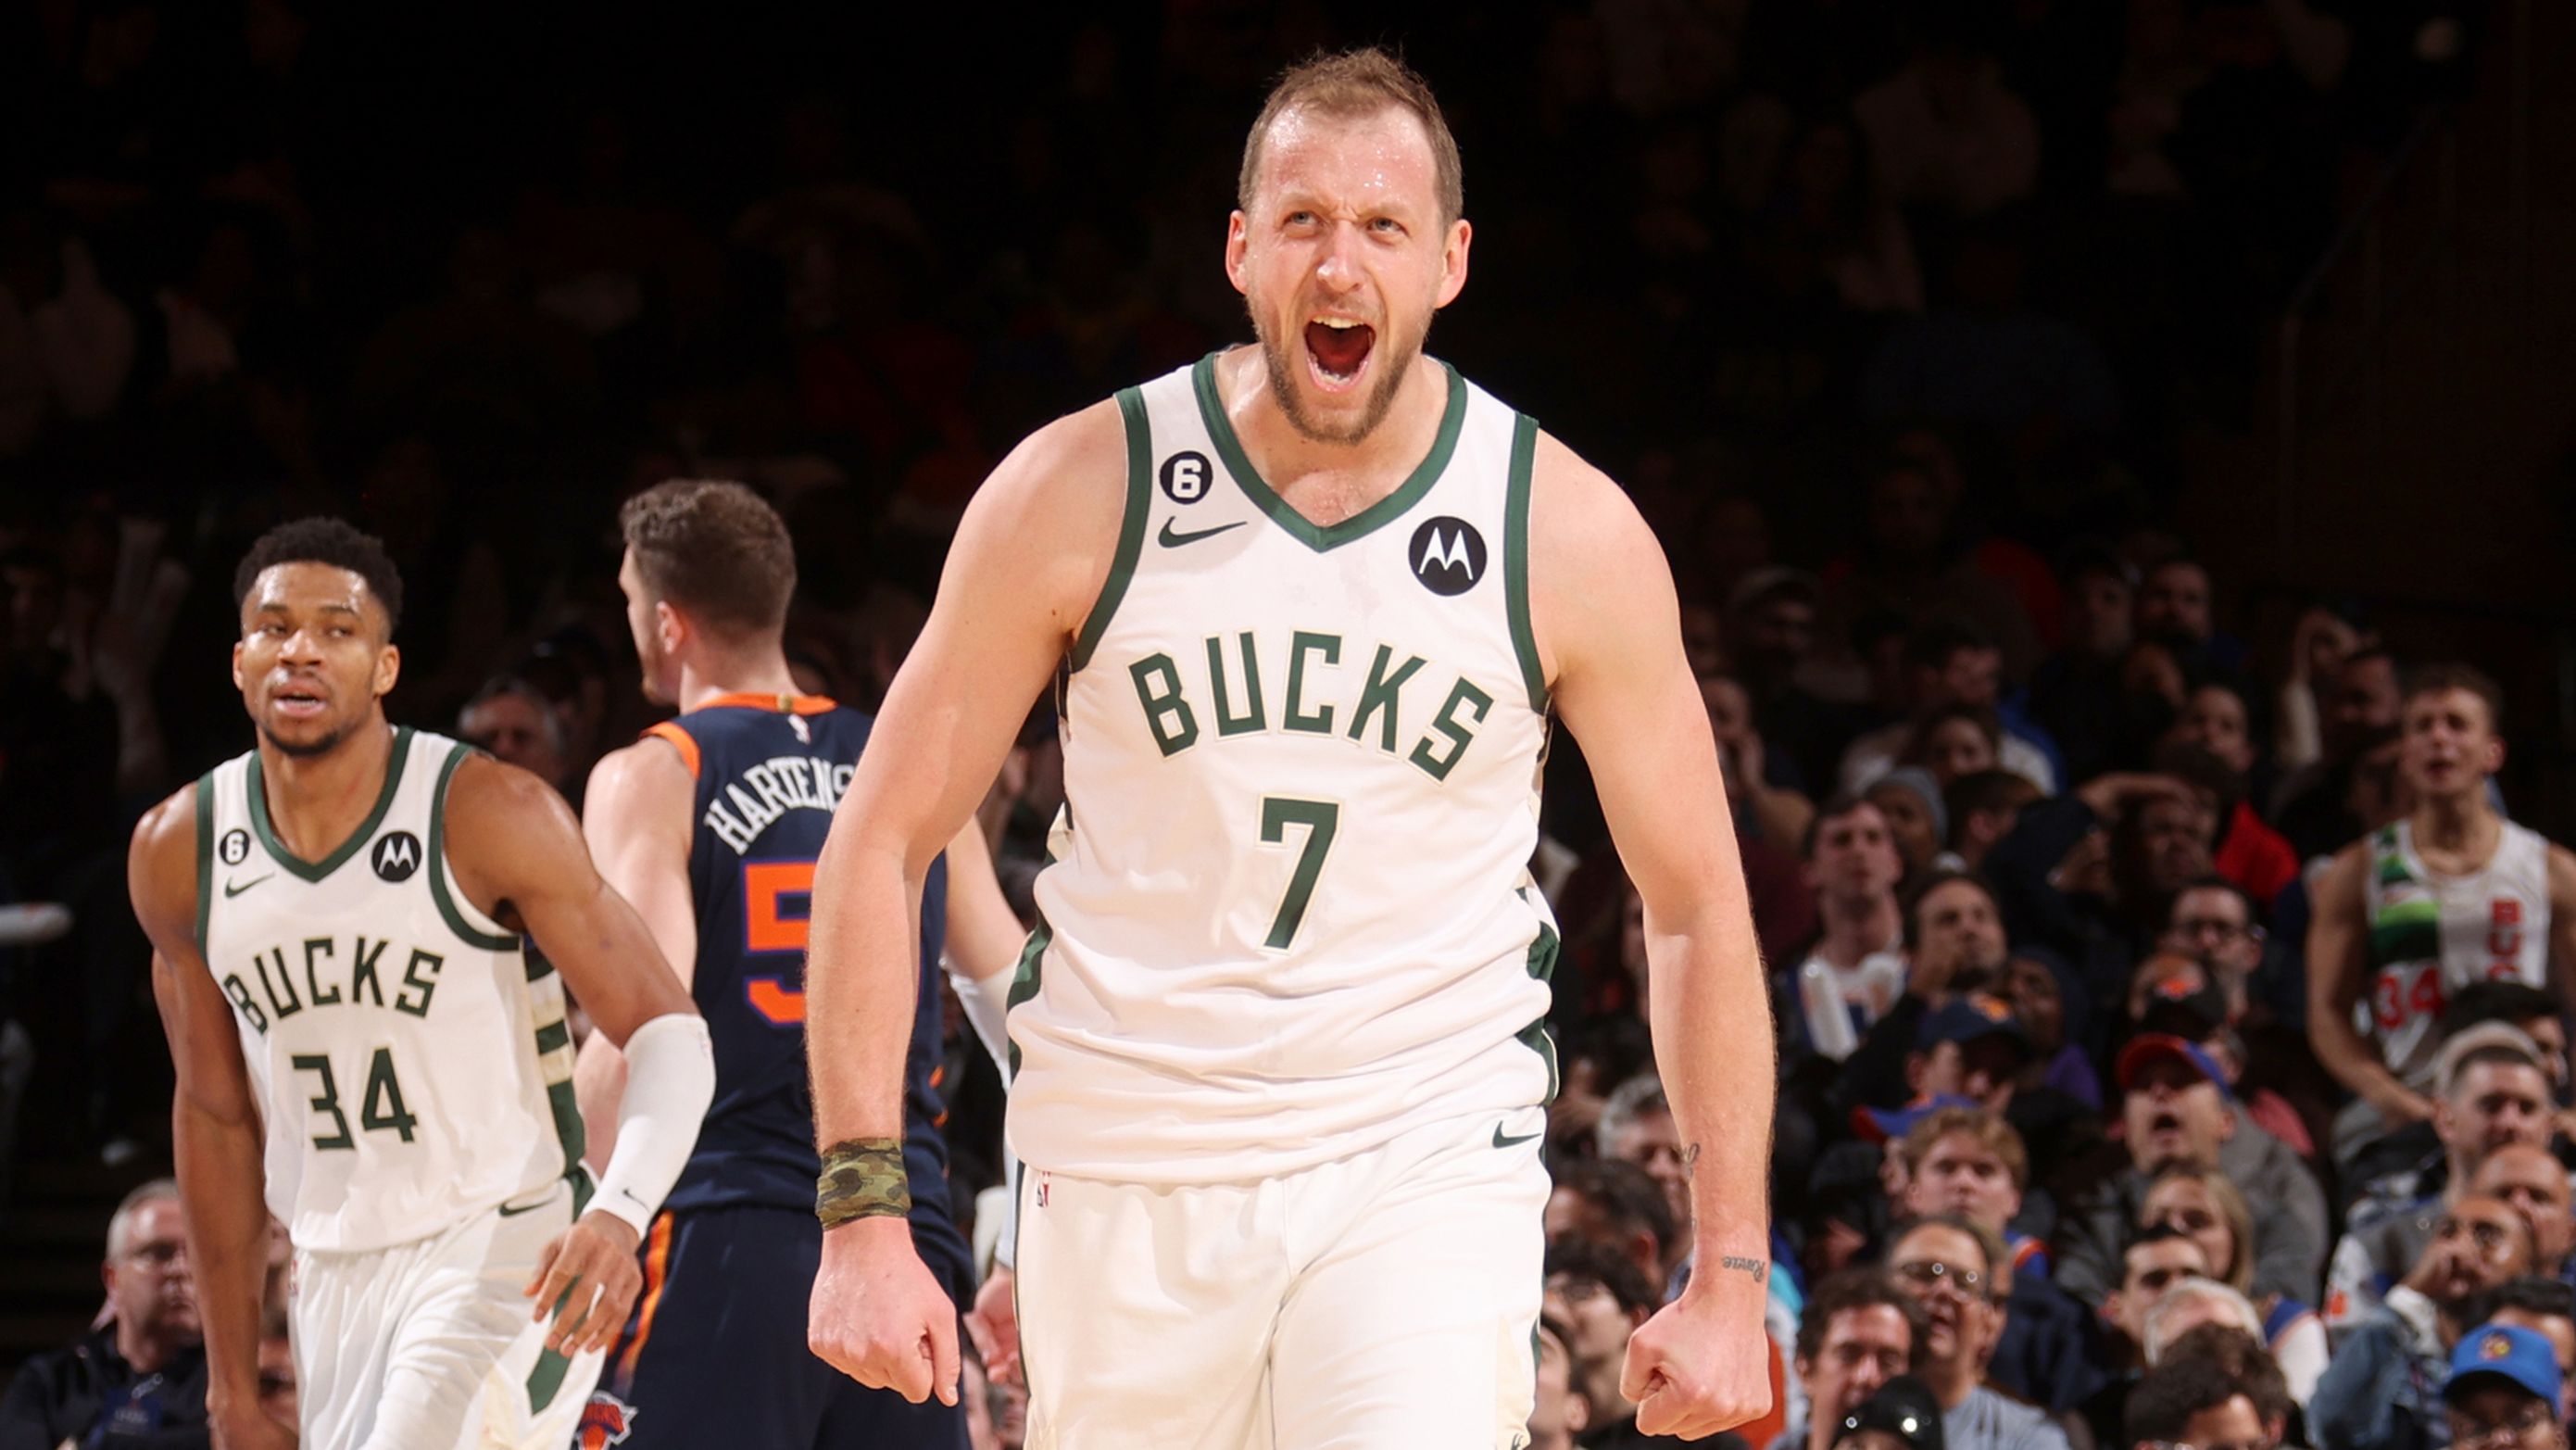 NEW YORK, NY - JANUARY 9: Joe Ingles #7 of the Milwaukee Bucks celebrates a play during the game against the New York Knicks on January 9, 2023 at Madison Square Garden in New York City, New York.  NOTE TO USER: User expressly acknowledges and agrees that, by downloading and or using this photograph, User is consenting to the terms and conditions of the Getty Images License Agreement. Mandatory Copyright Notice: Copyright 2023 NBAE  (Photo by Nathaniel S. Butler/NBAE via Getty Images)